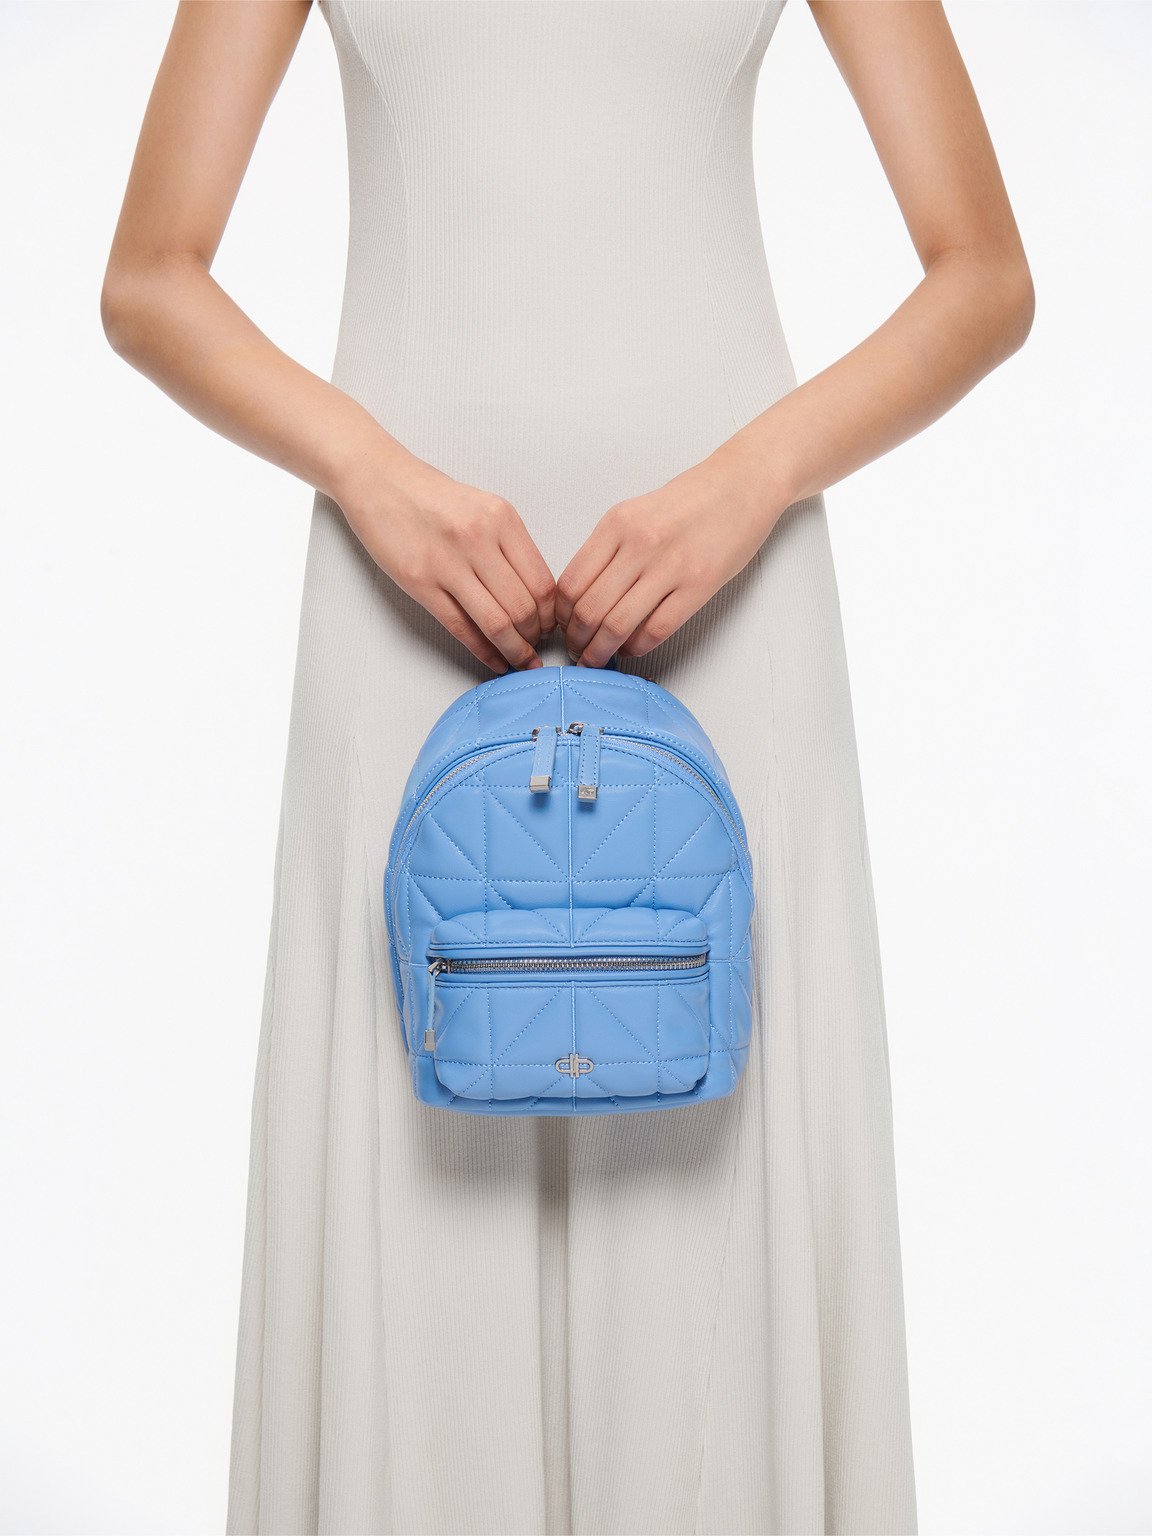 PEDRO Icon Mini Backpack in Pixel, Blue